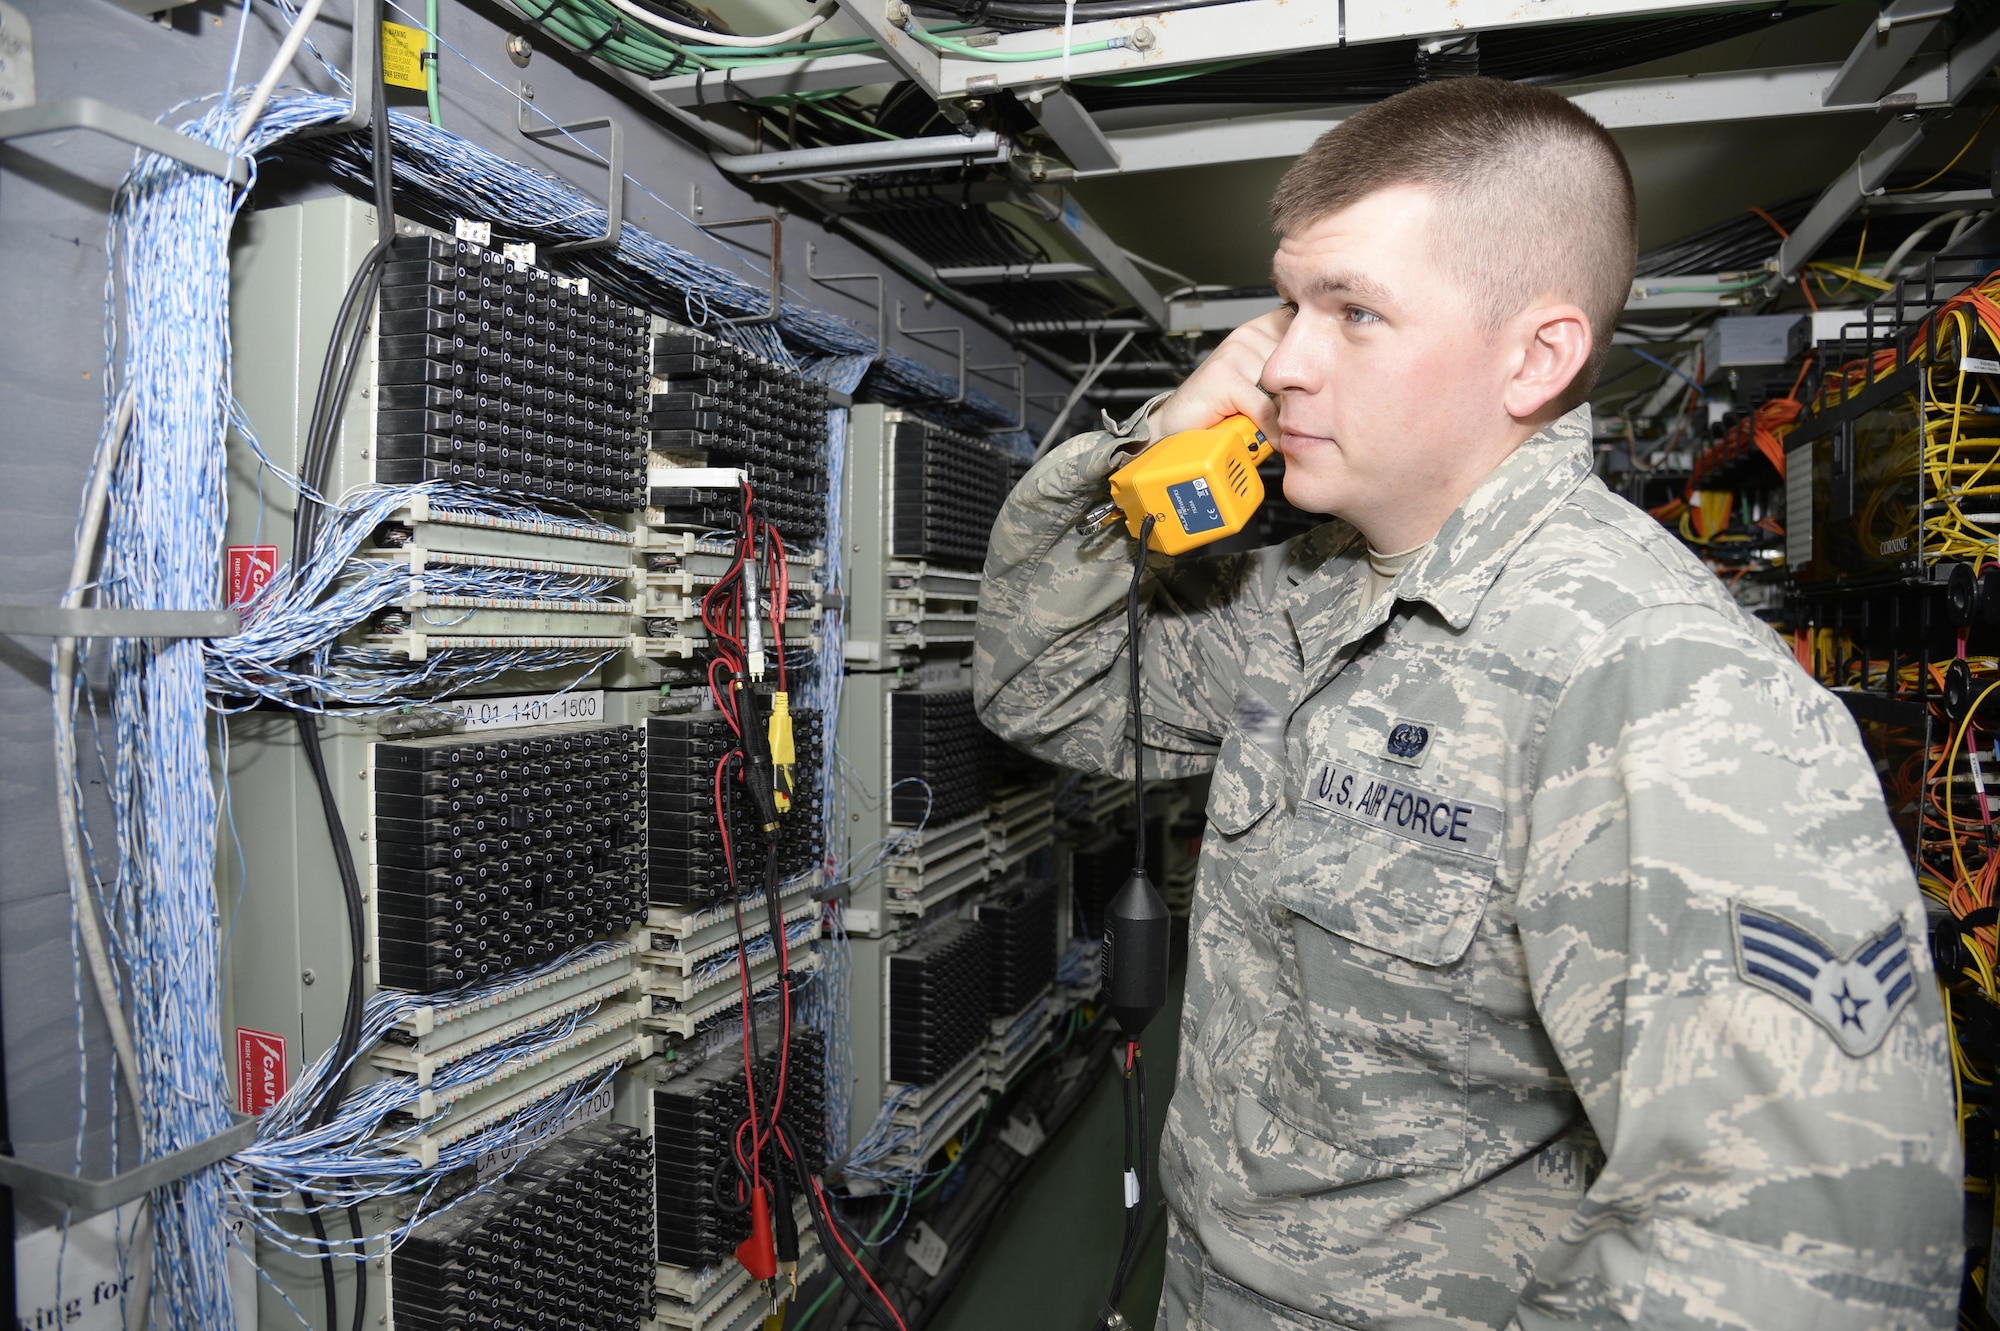 Senior Airman Christopher, client service technician, tests a new telephone line at an undisclosed location in Southwest Asia March 30, 2015. During their rotation CST Airmen have worked approximately 2,200 tickets and currently assist up to 150 customers a day with new account requests in addition to handling computer and telephone issues. Christopher is currently deployed from Mountain Home Air Force Base, Idaho. (U.S. Air Force photo/Tech. Sgt. Marie Brown/RELEASED)